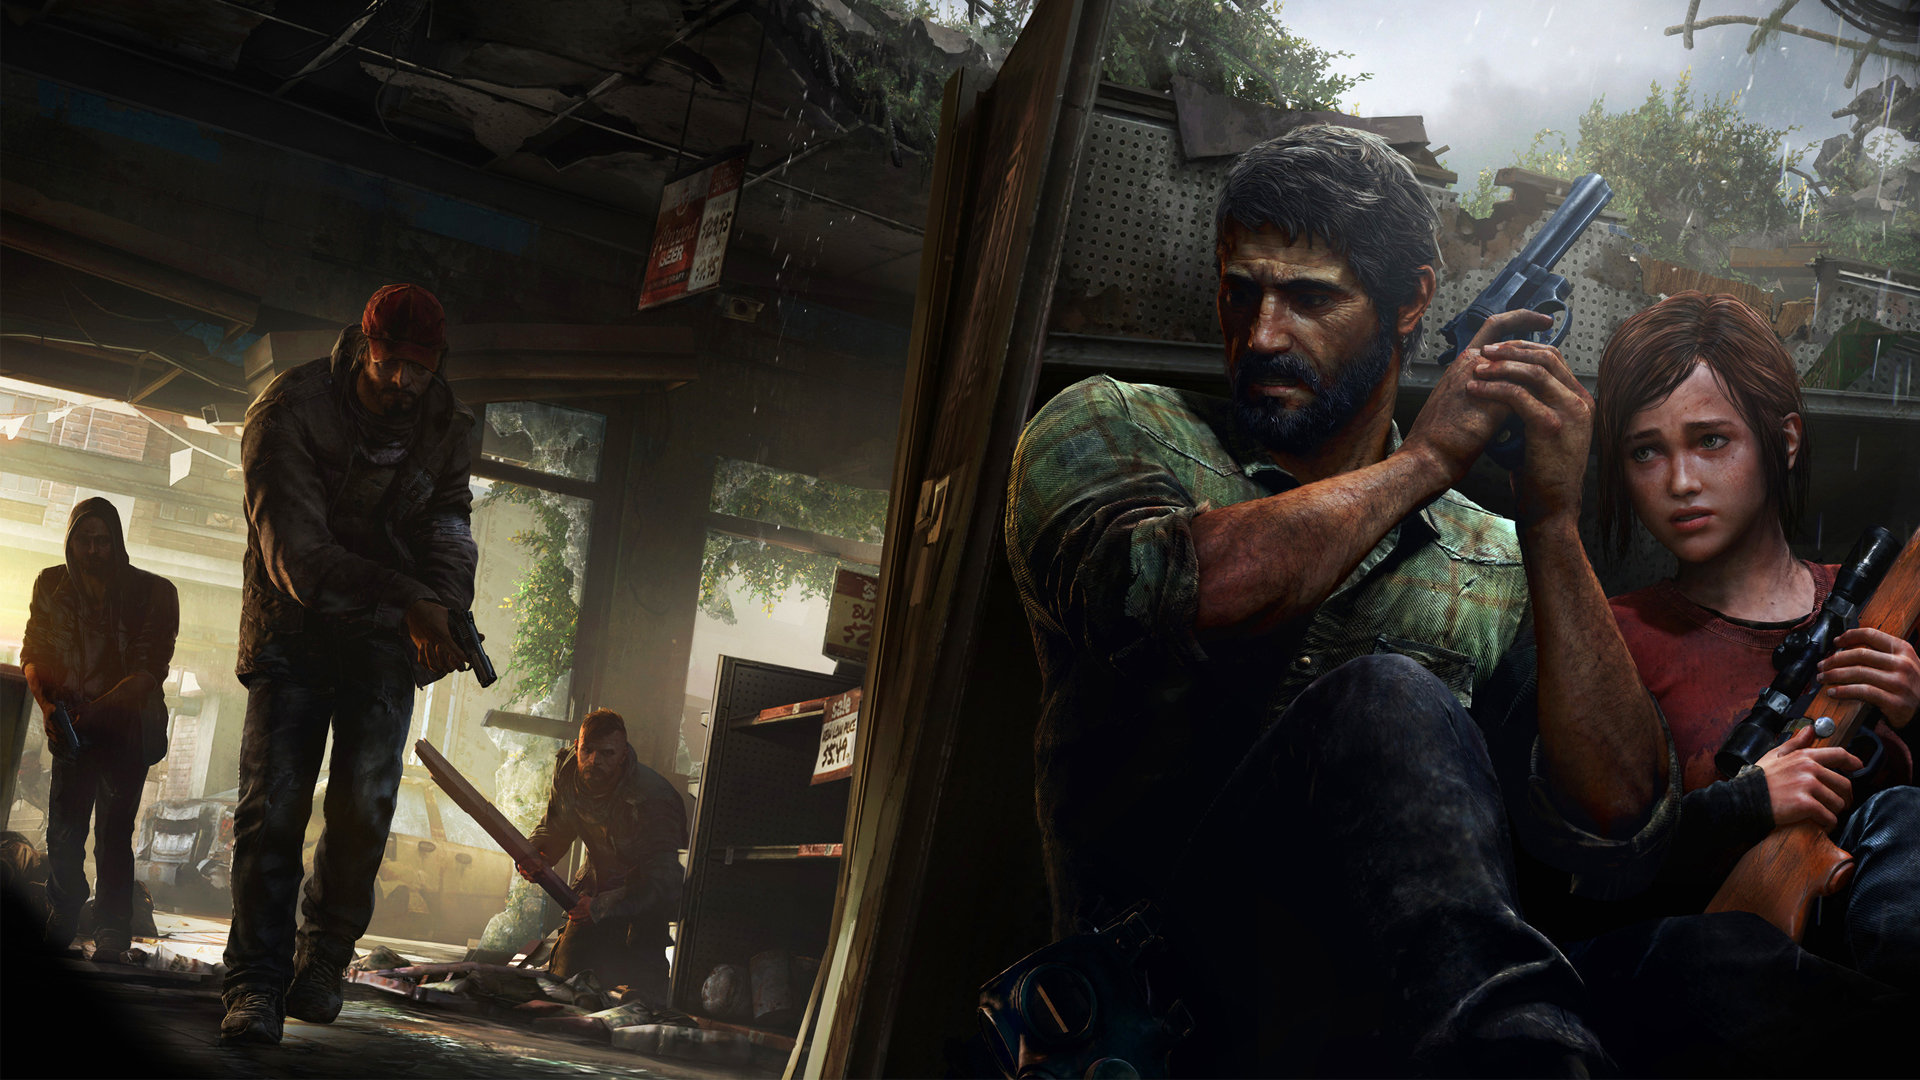 Download 1080p The Last Of Us PC wallpaper ID:248109 for free